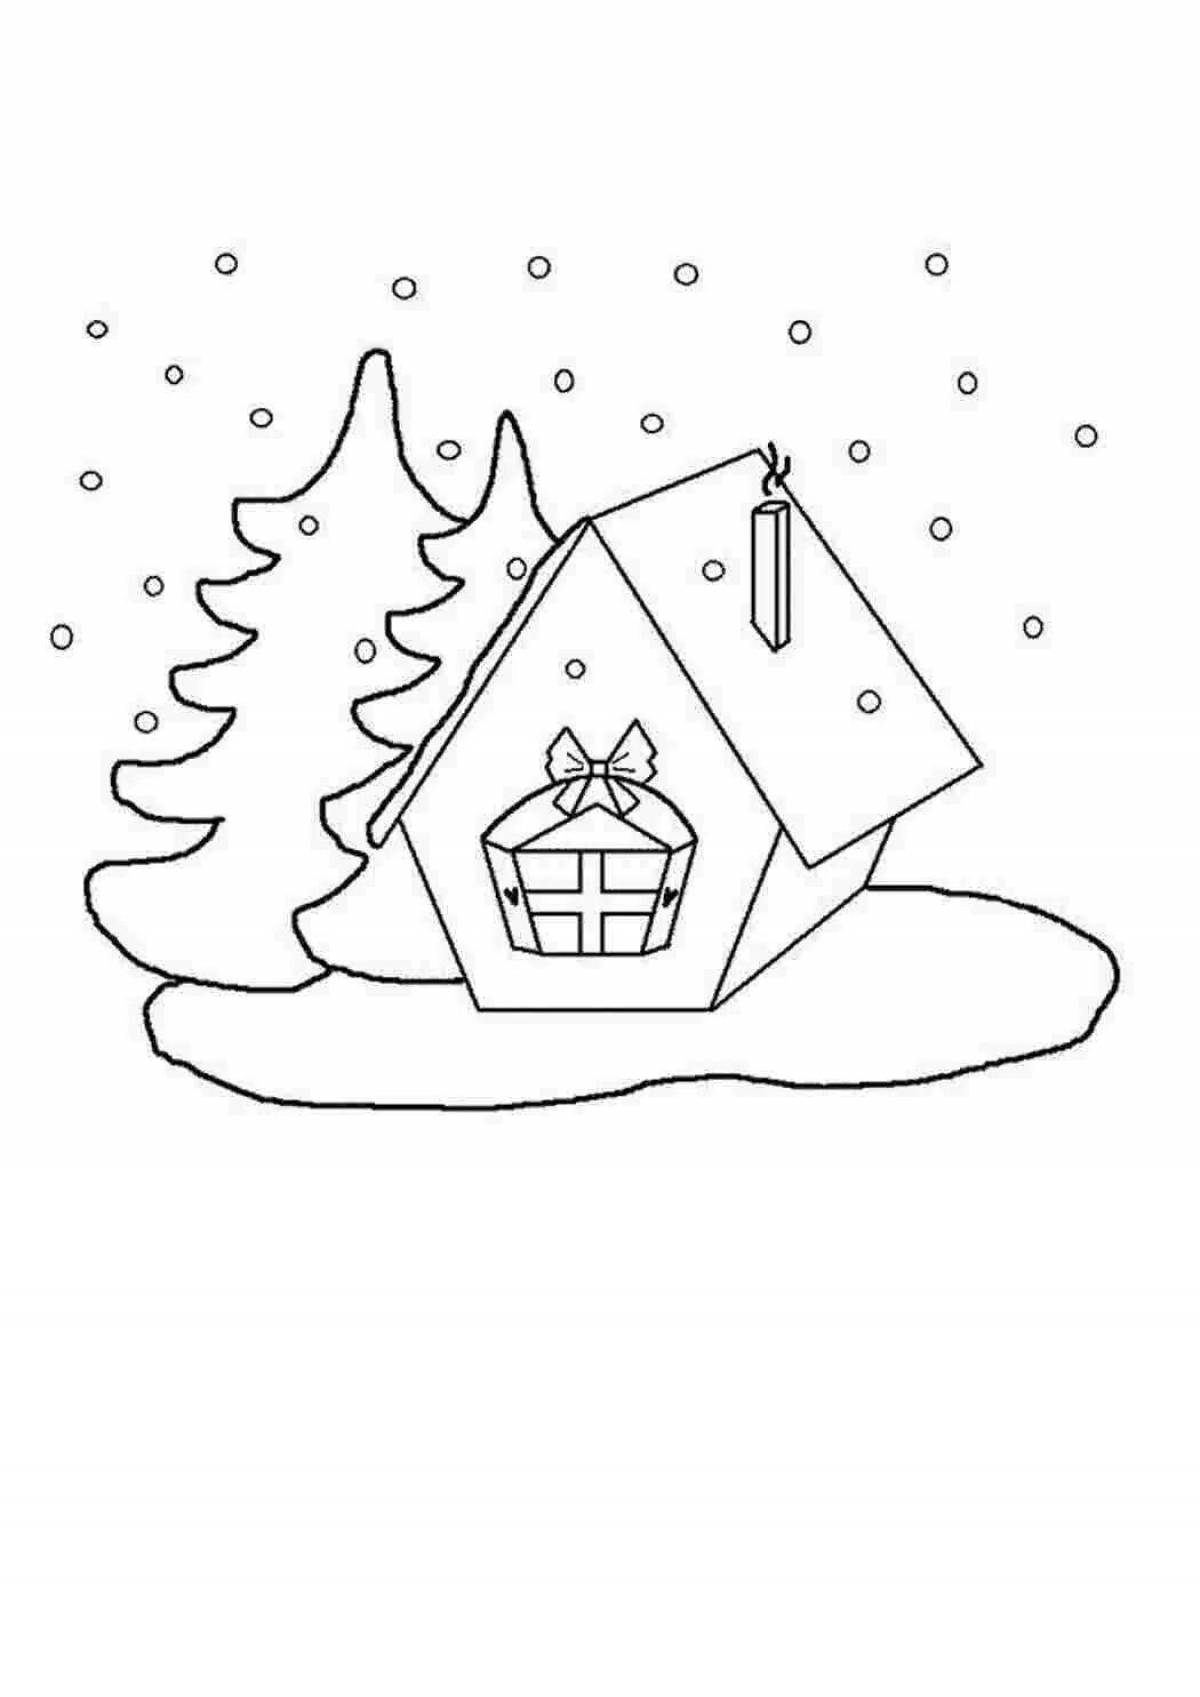 Children's winter house coloring book for kids